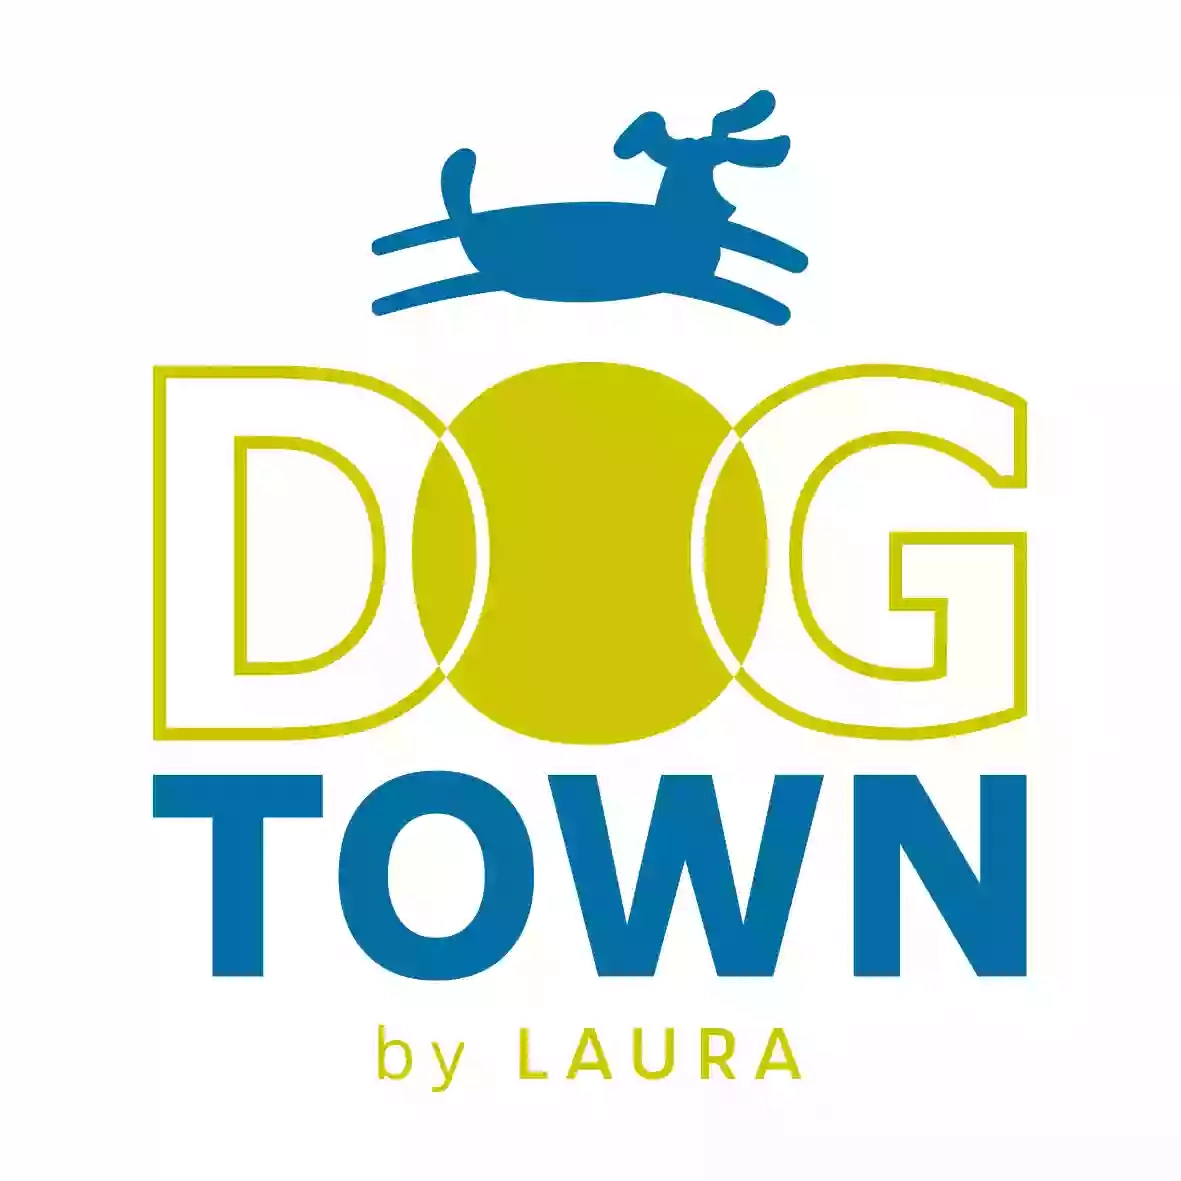 Dog Town by Laura Centro Cinofilo